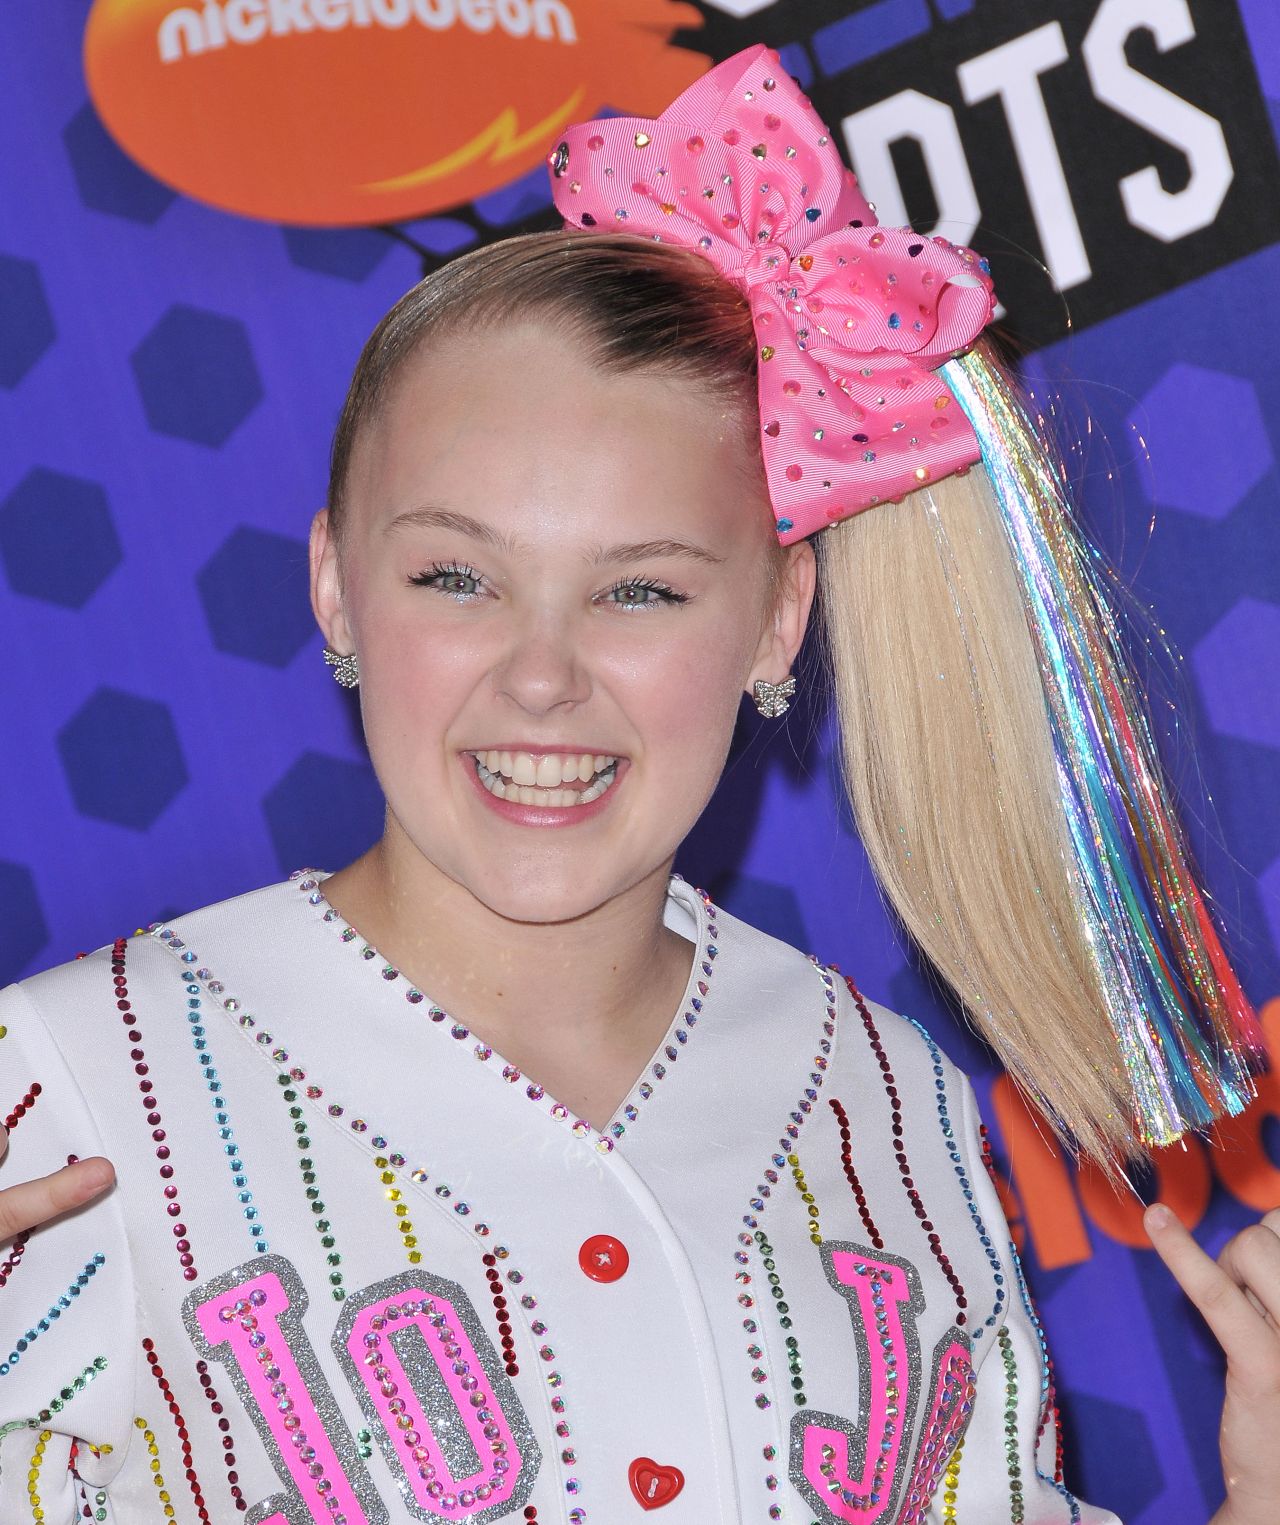 Dance Mom's JoJo Siwa Gets Real About Fame, Music & Her. 